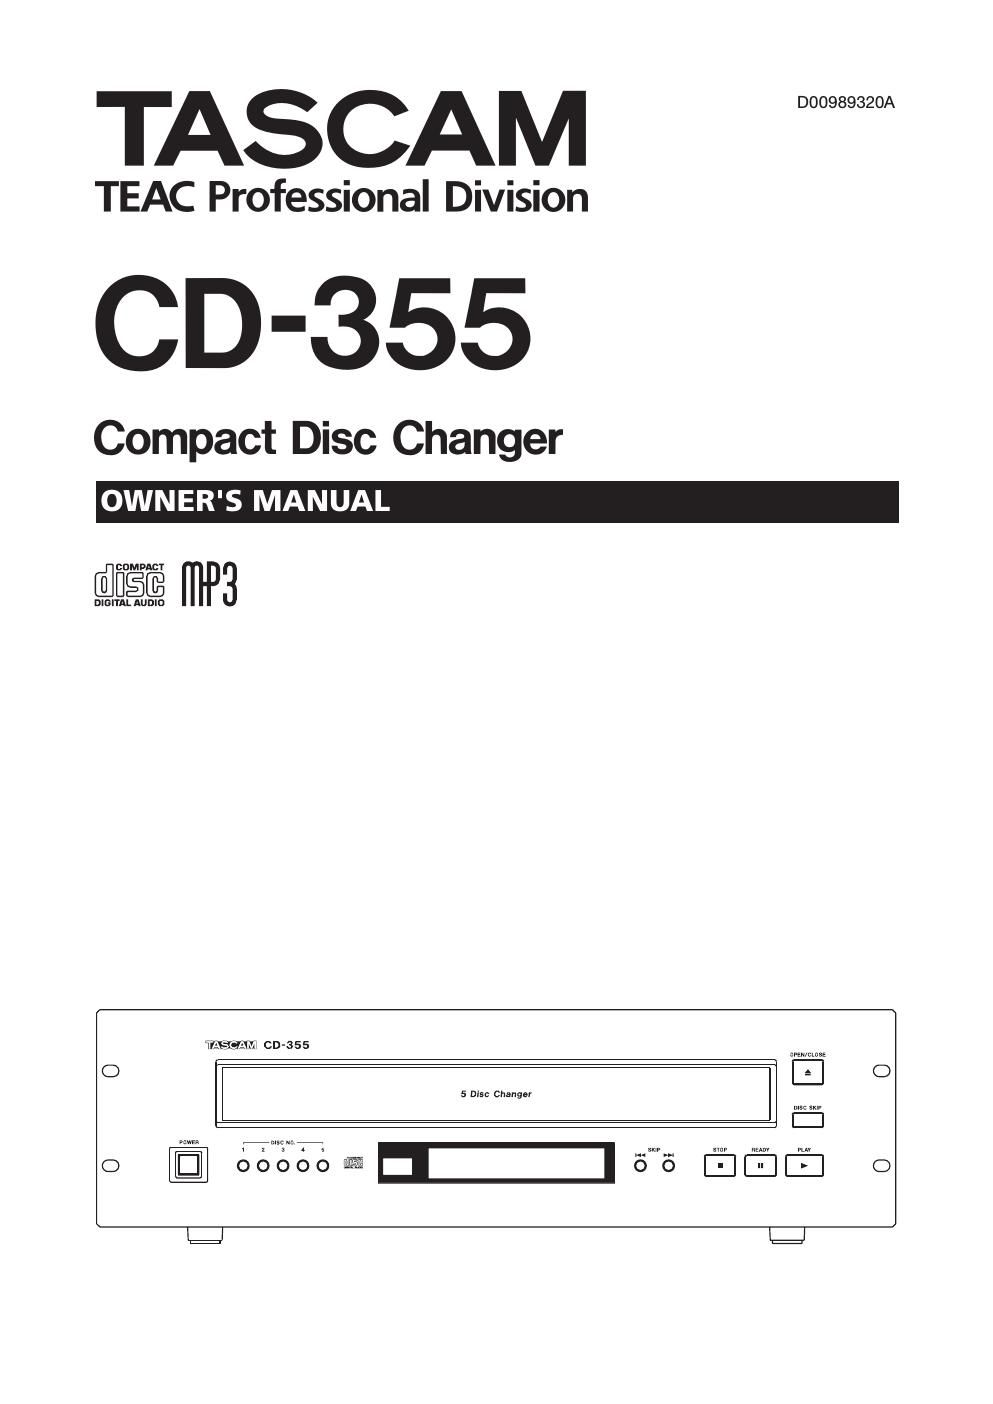 Tascam CD 355 Owners Manual